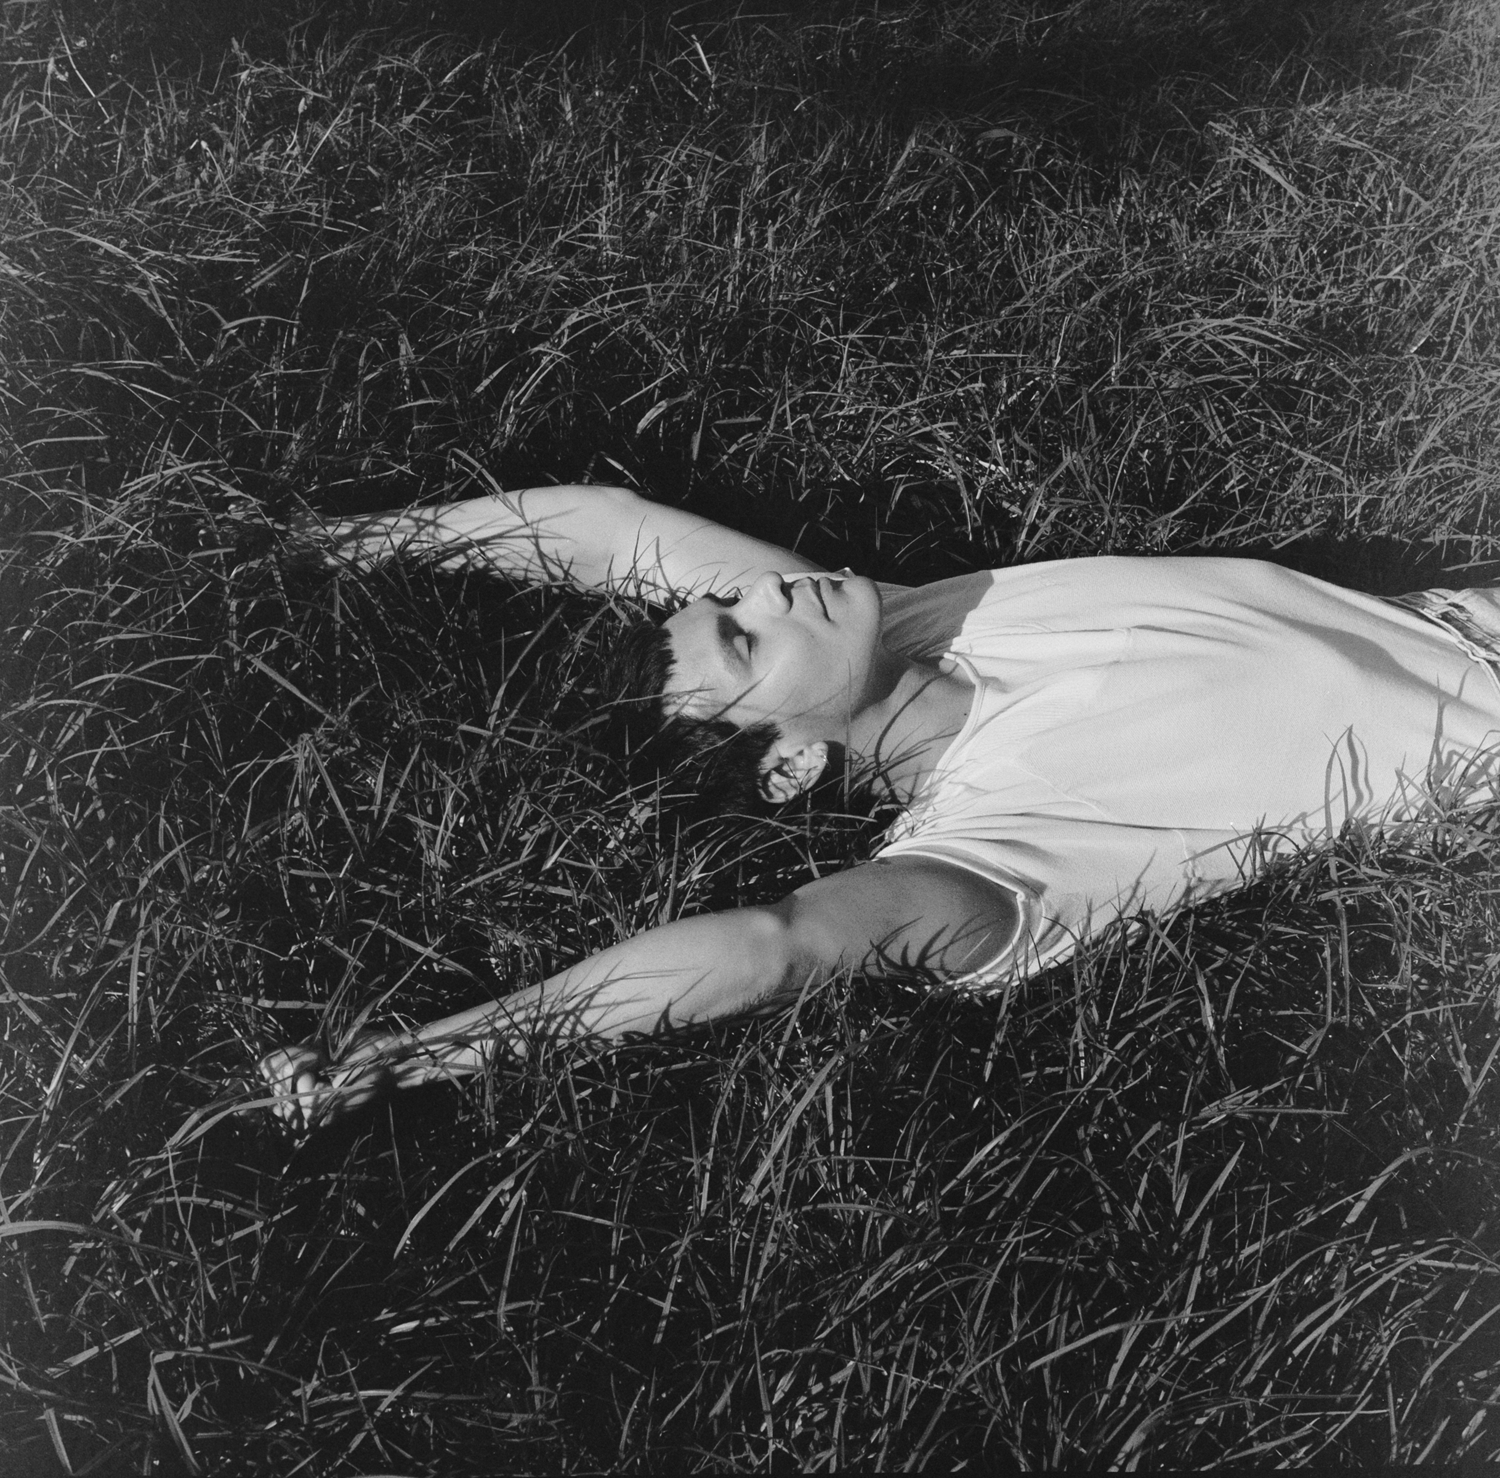 Black and white photograph of a man in a white shirt asleep in a grass field.